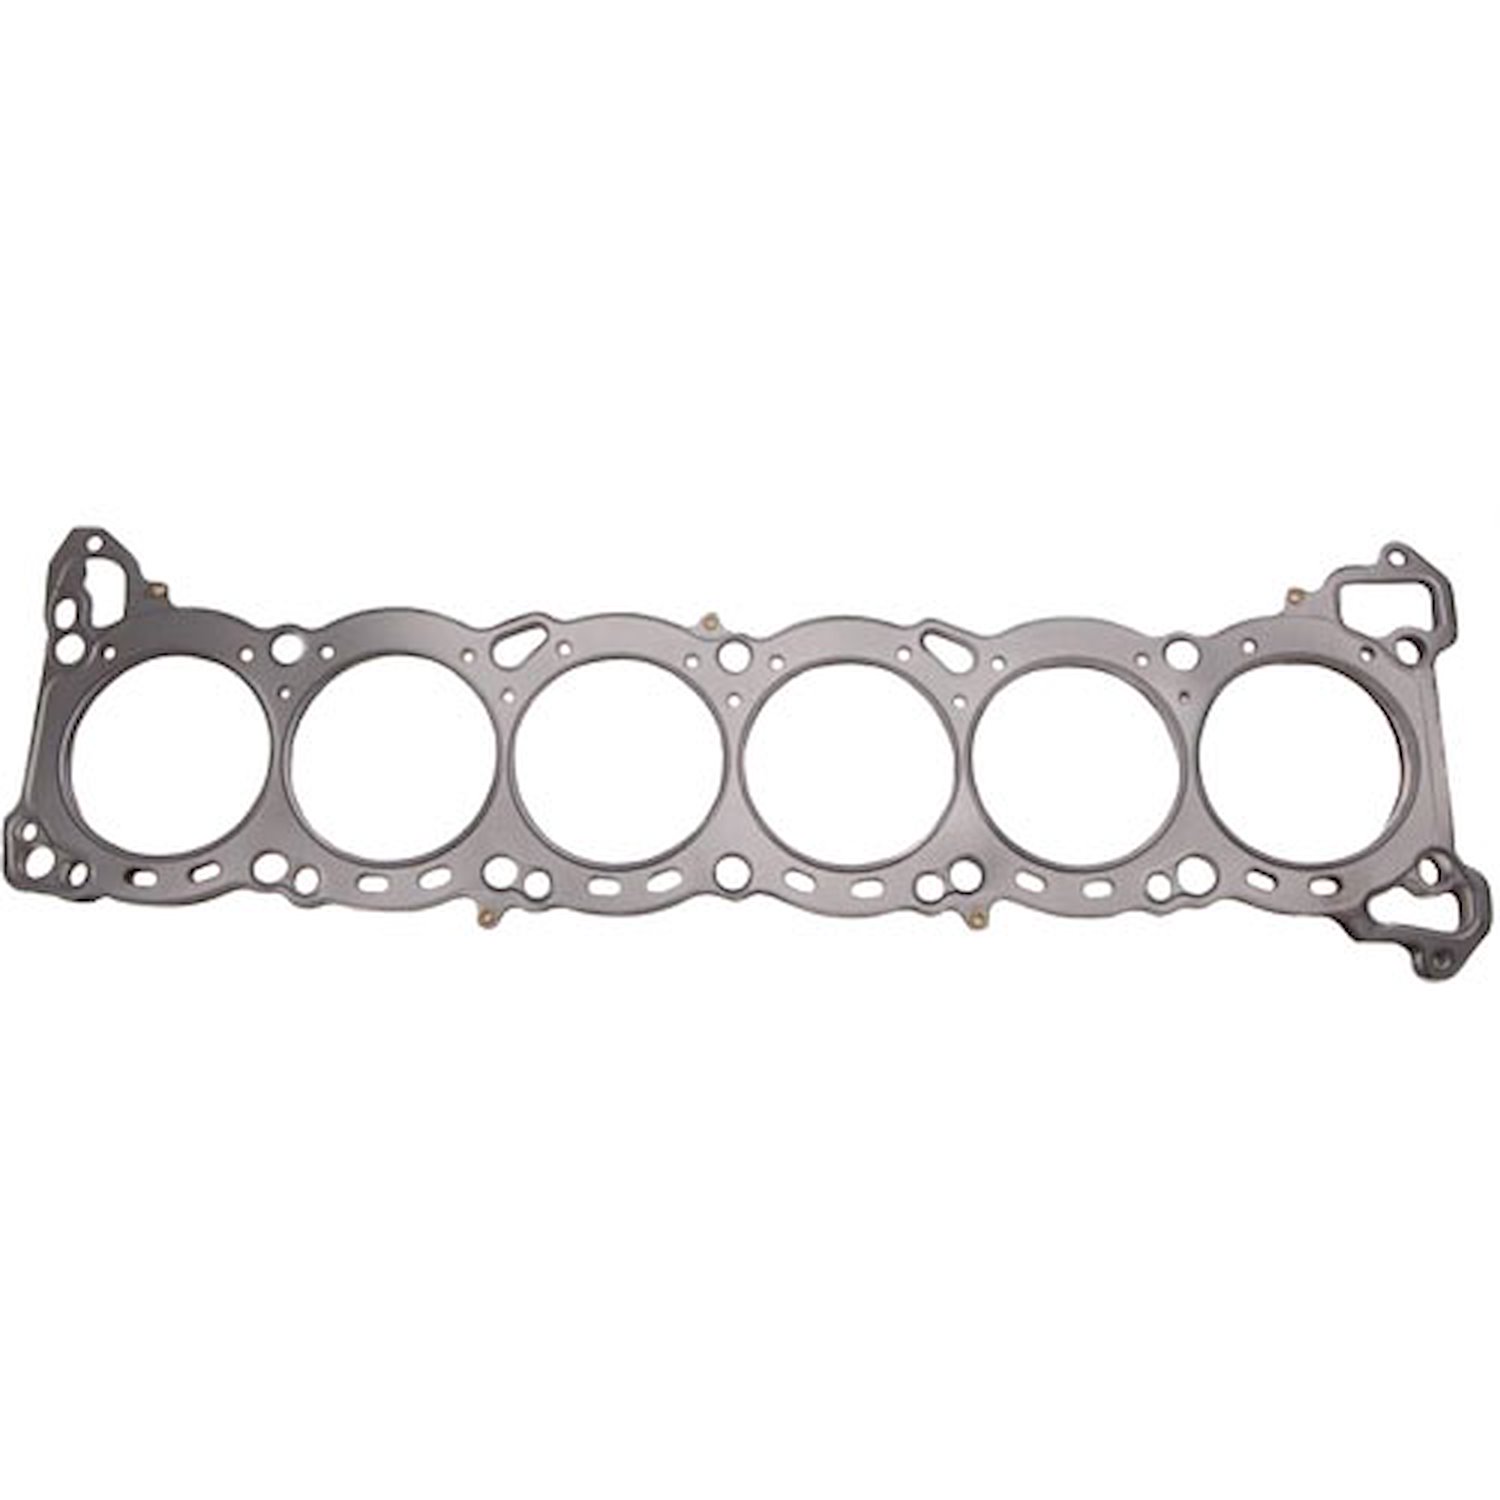 Head Gasket Fits Nissan Skyline 1989-2002 Model Years with RB26DETT Engine